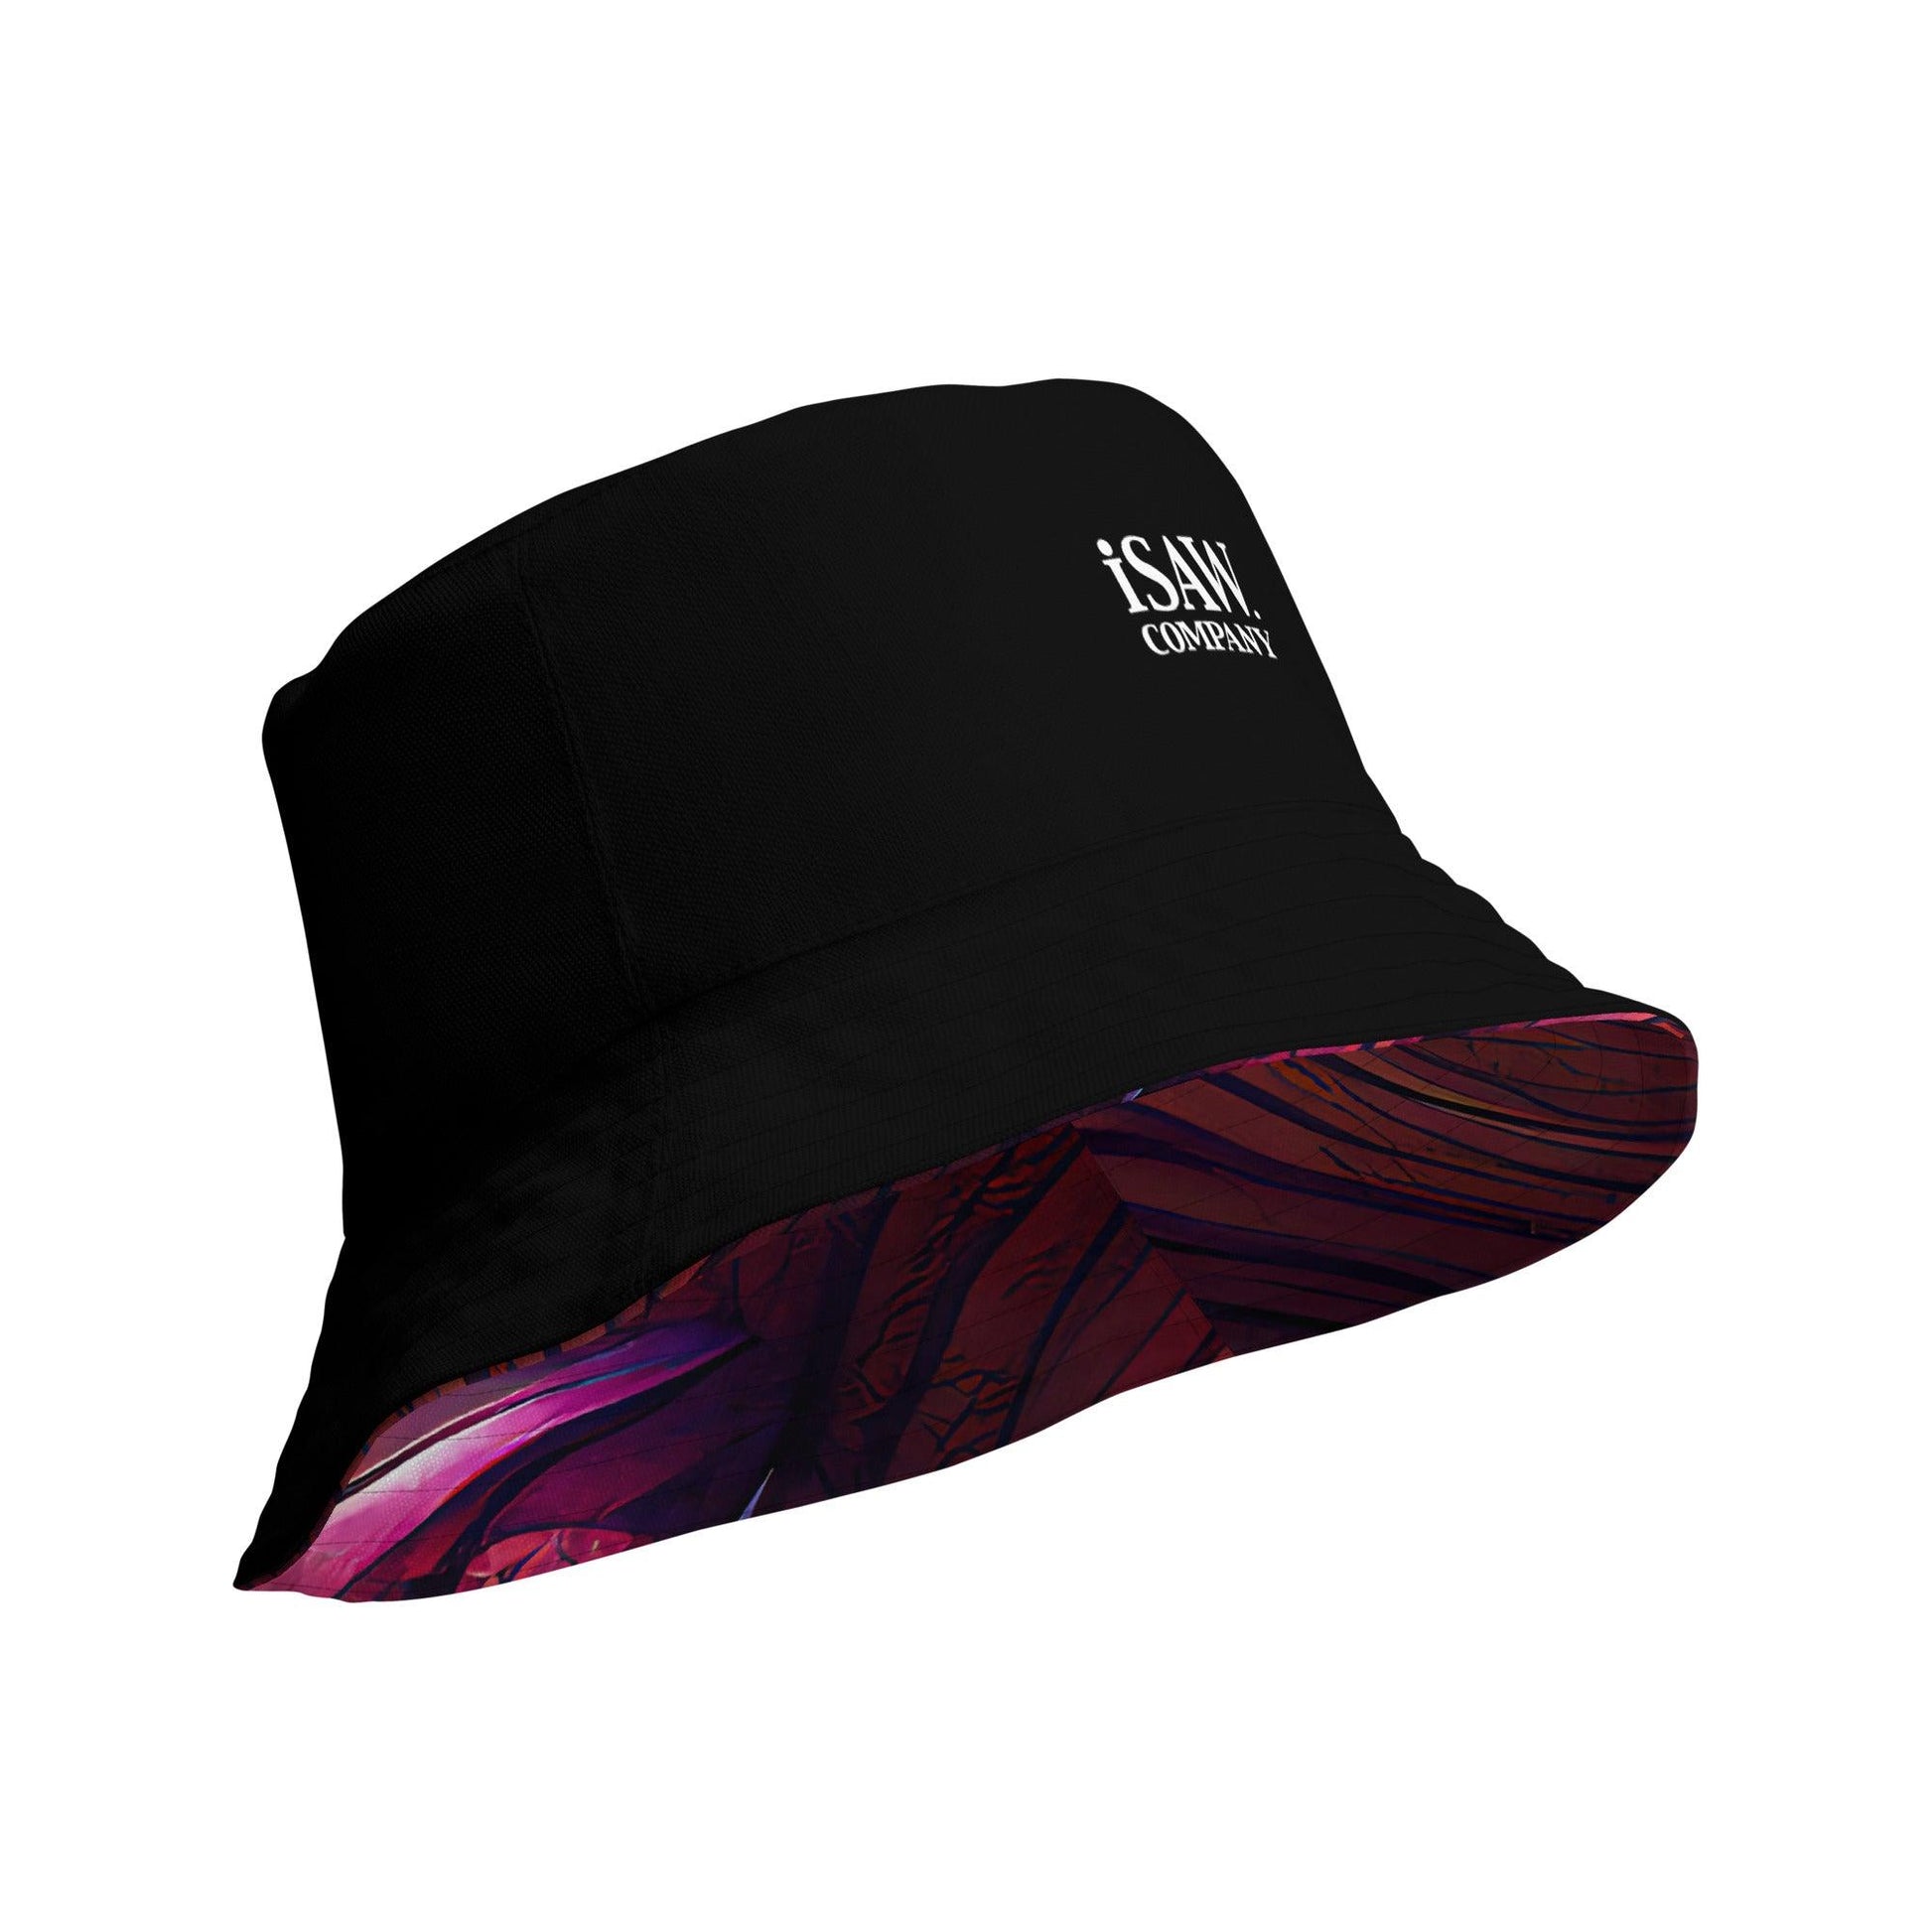 iSAW Reversible Black Bucket Hat - iSAW Company